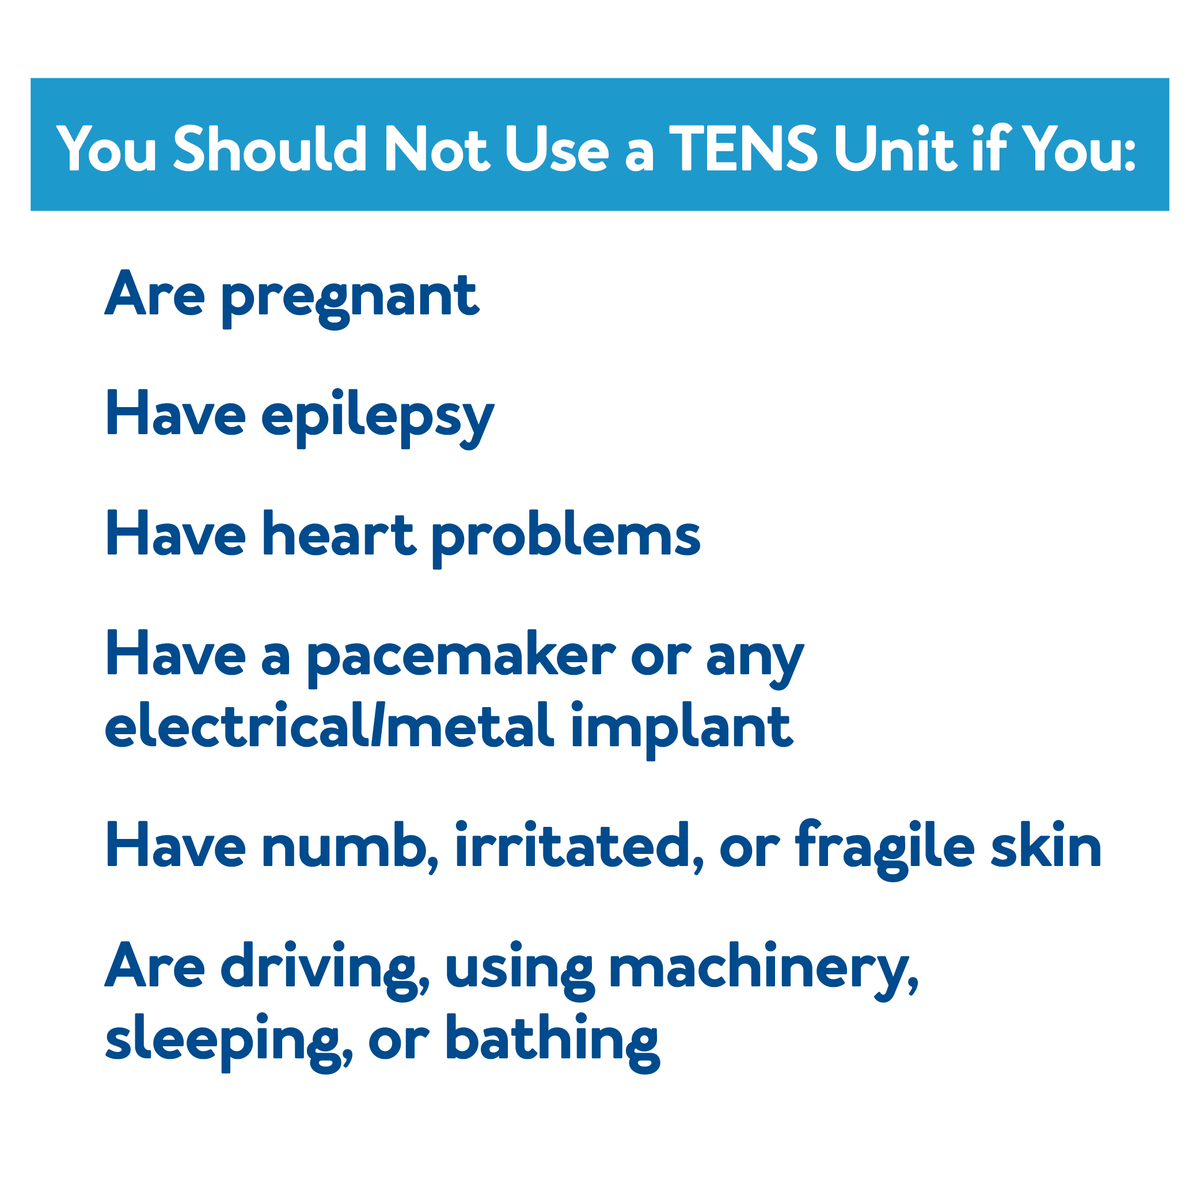 You should not use a TENS unit if you : Further details are provided next to image